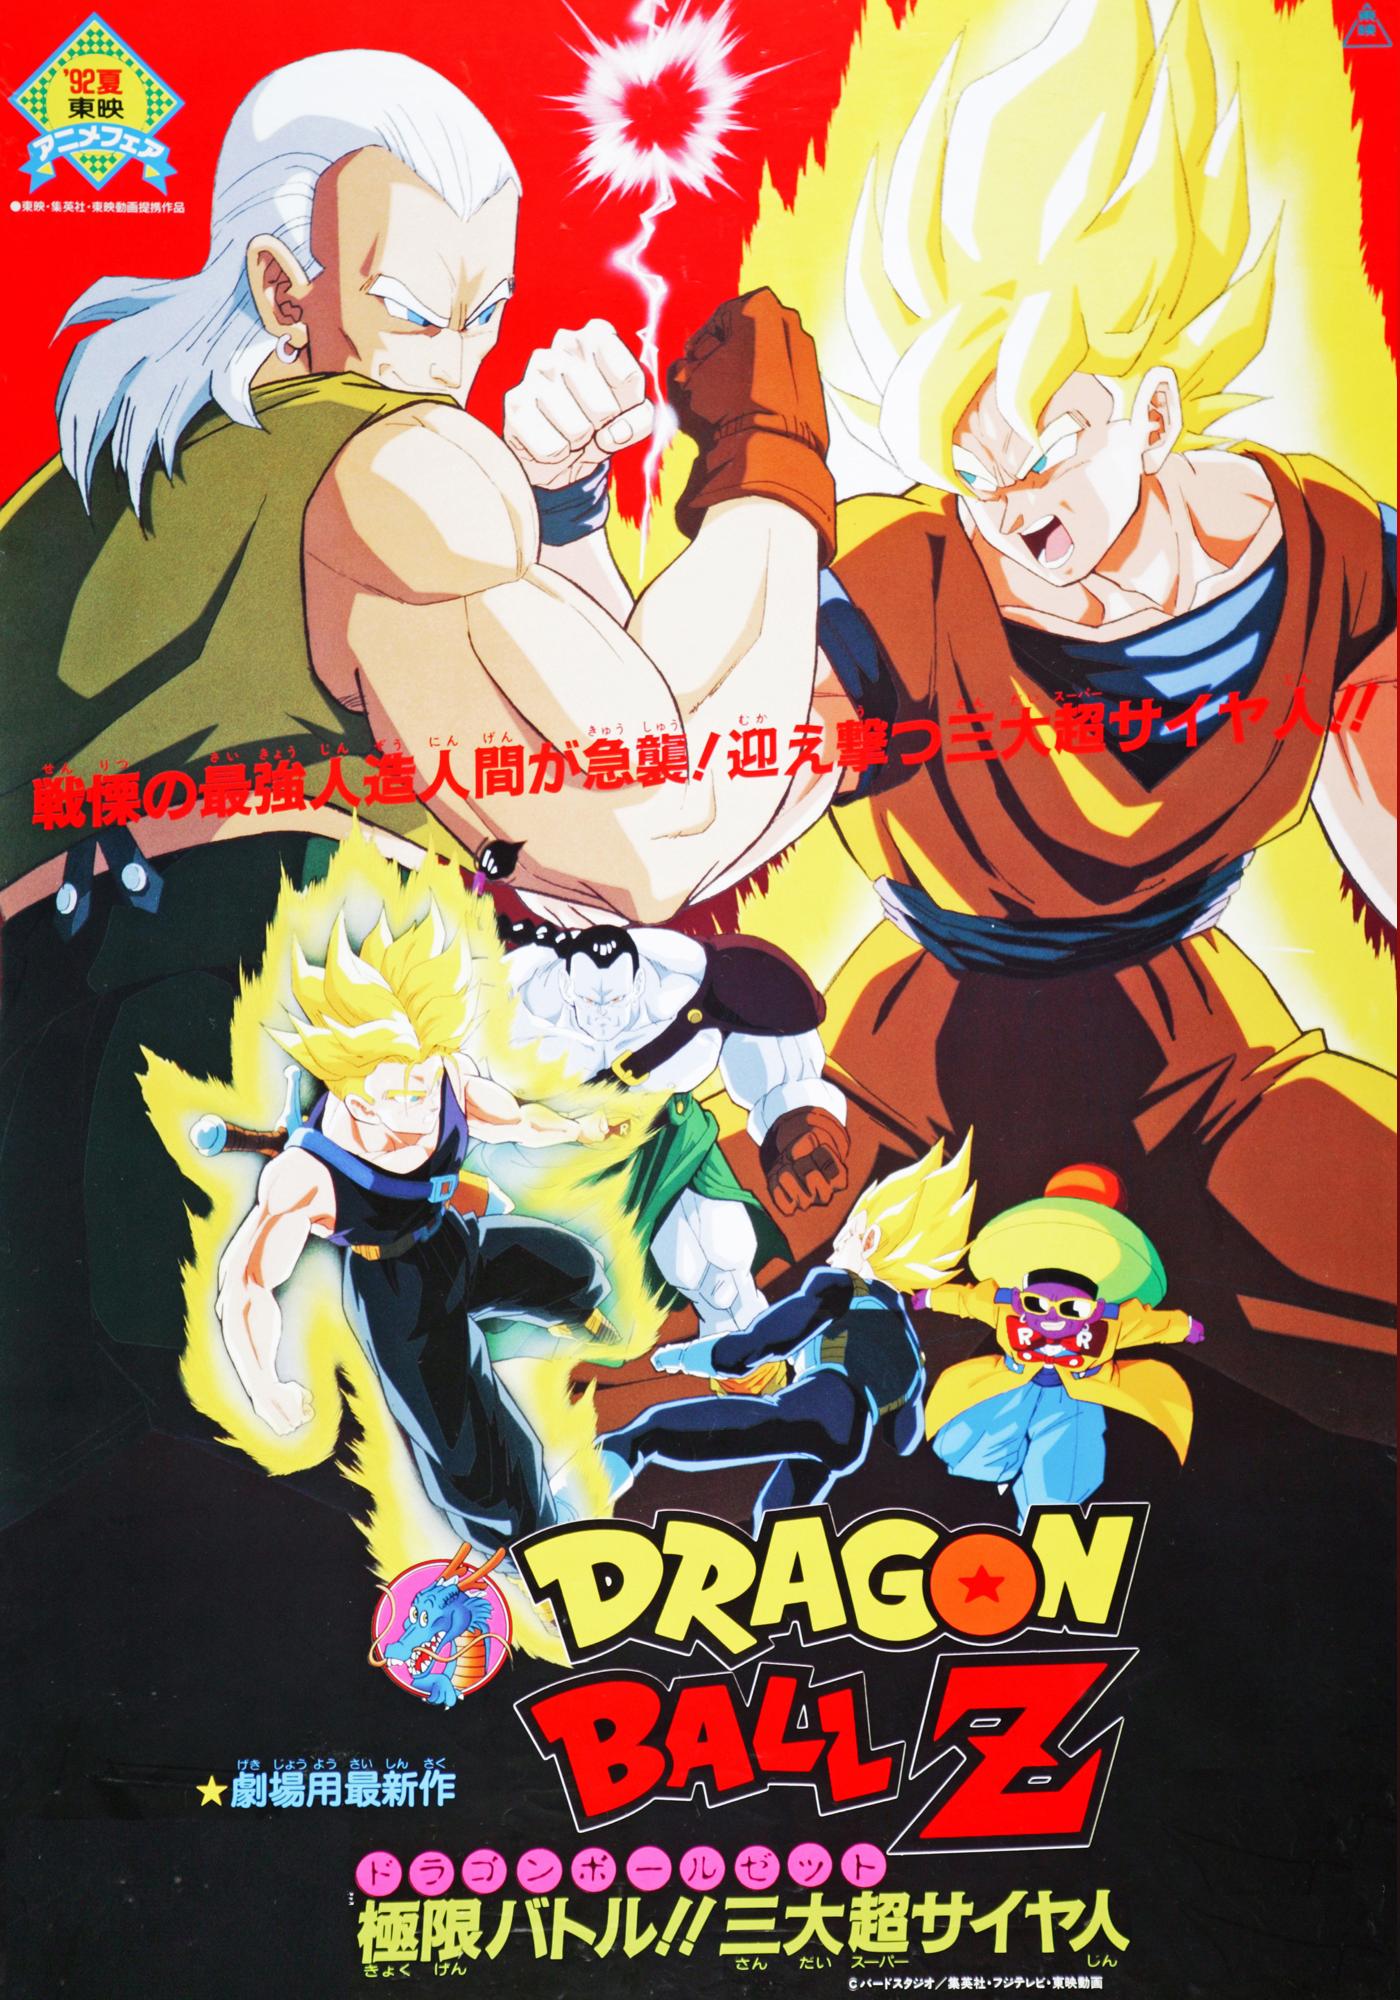 chad louie add dragon ball z android 13 photo